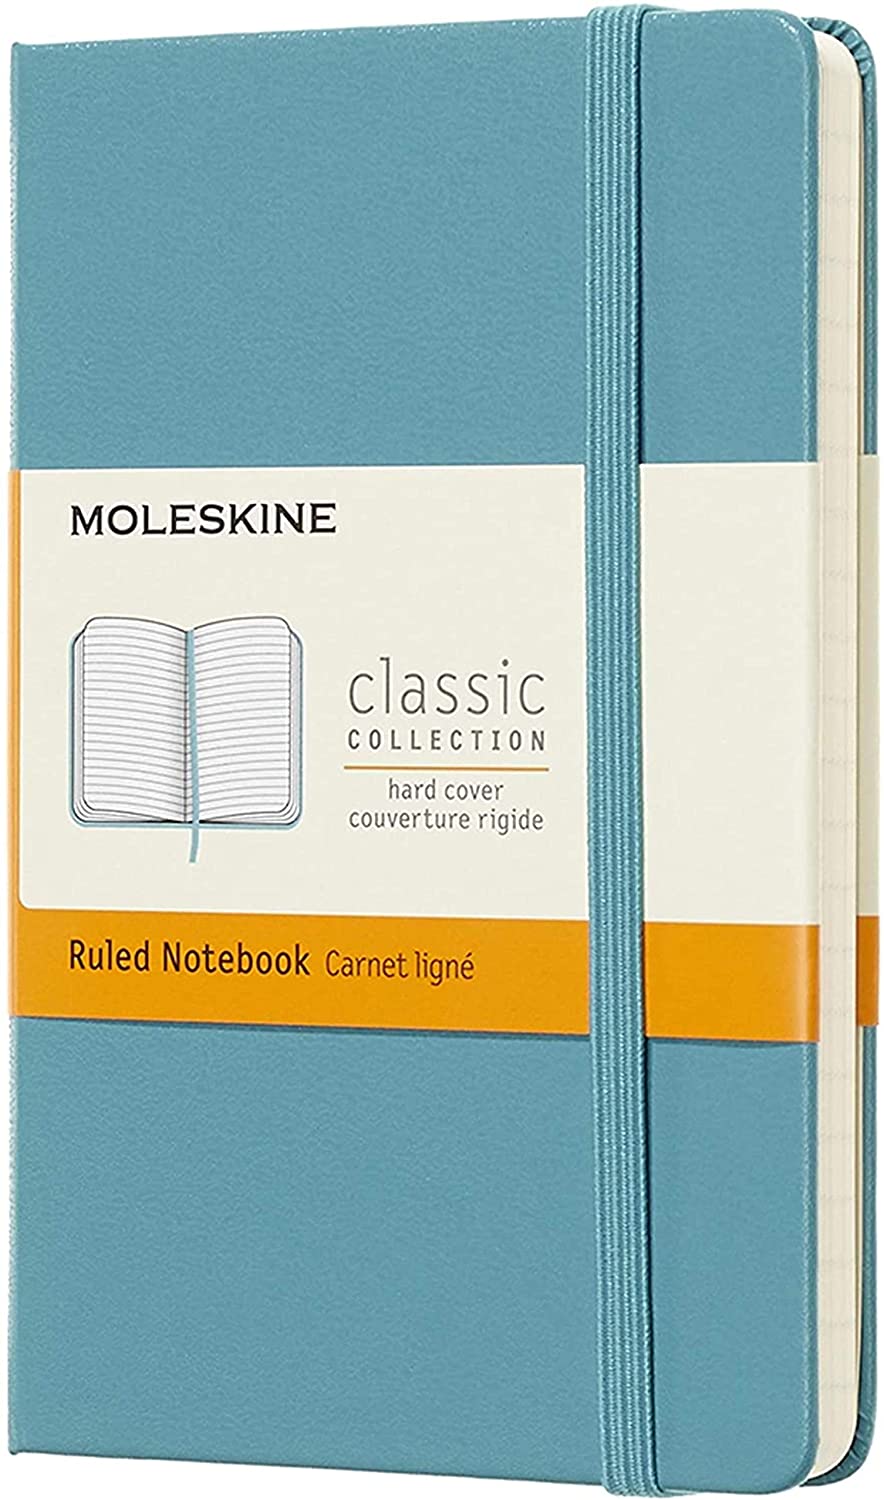 Ruled Moleskine Classic Notebook Reef Blue for sale in Pakistan at Chapters 